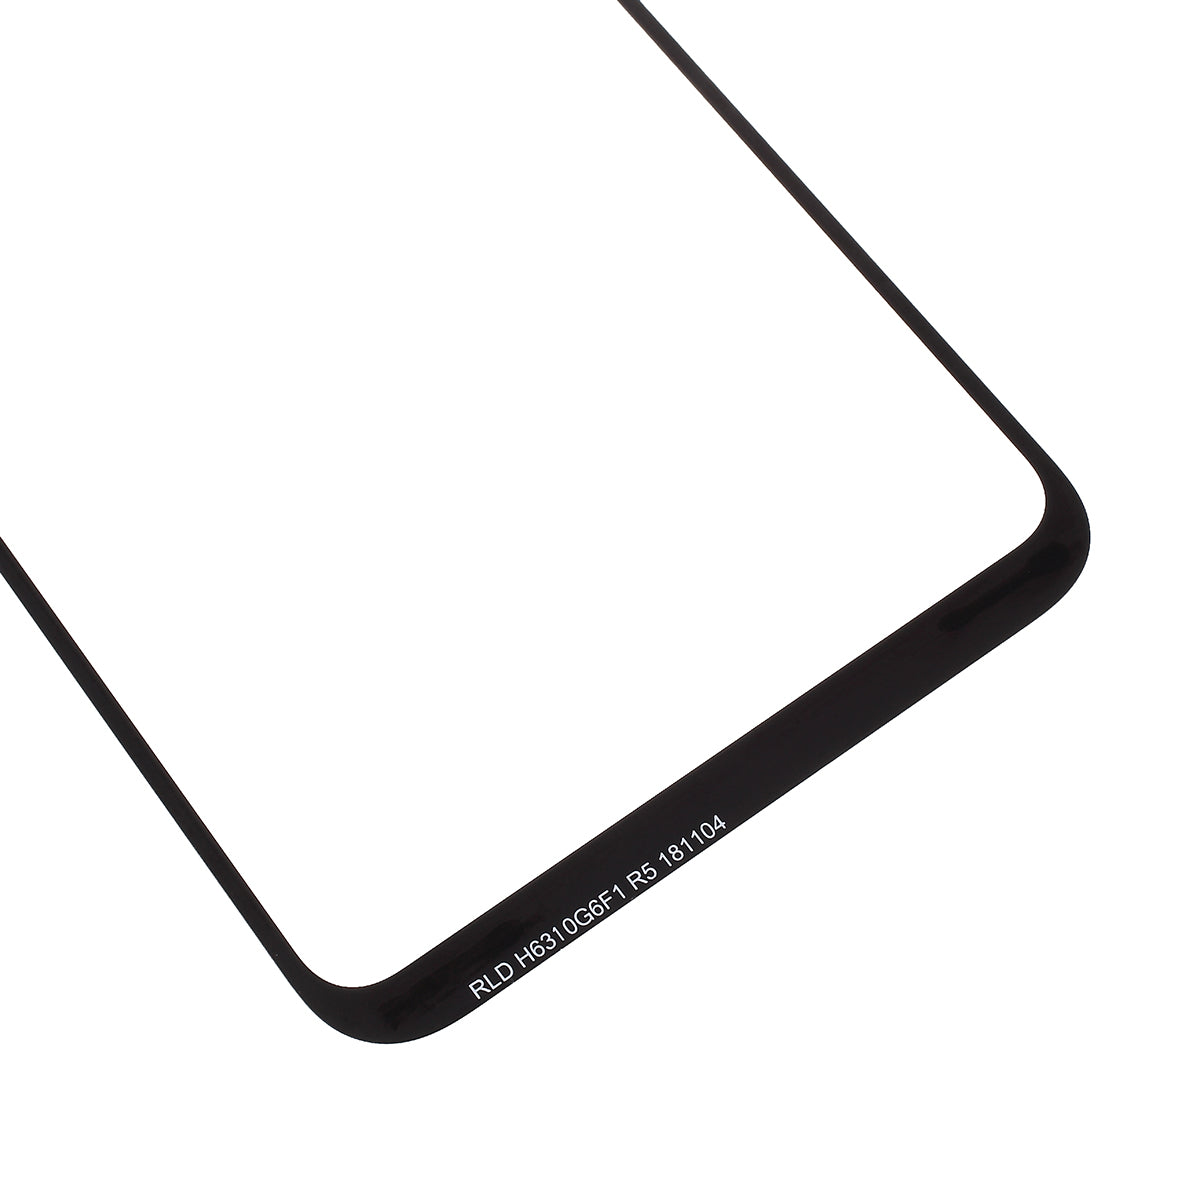 Good Quality Front Screen Glass Lens for Huawei Mate 20 Lite (without Logo)